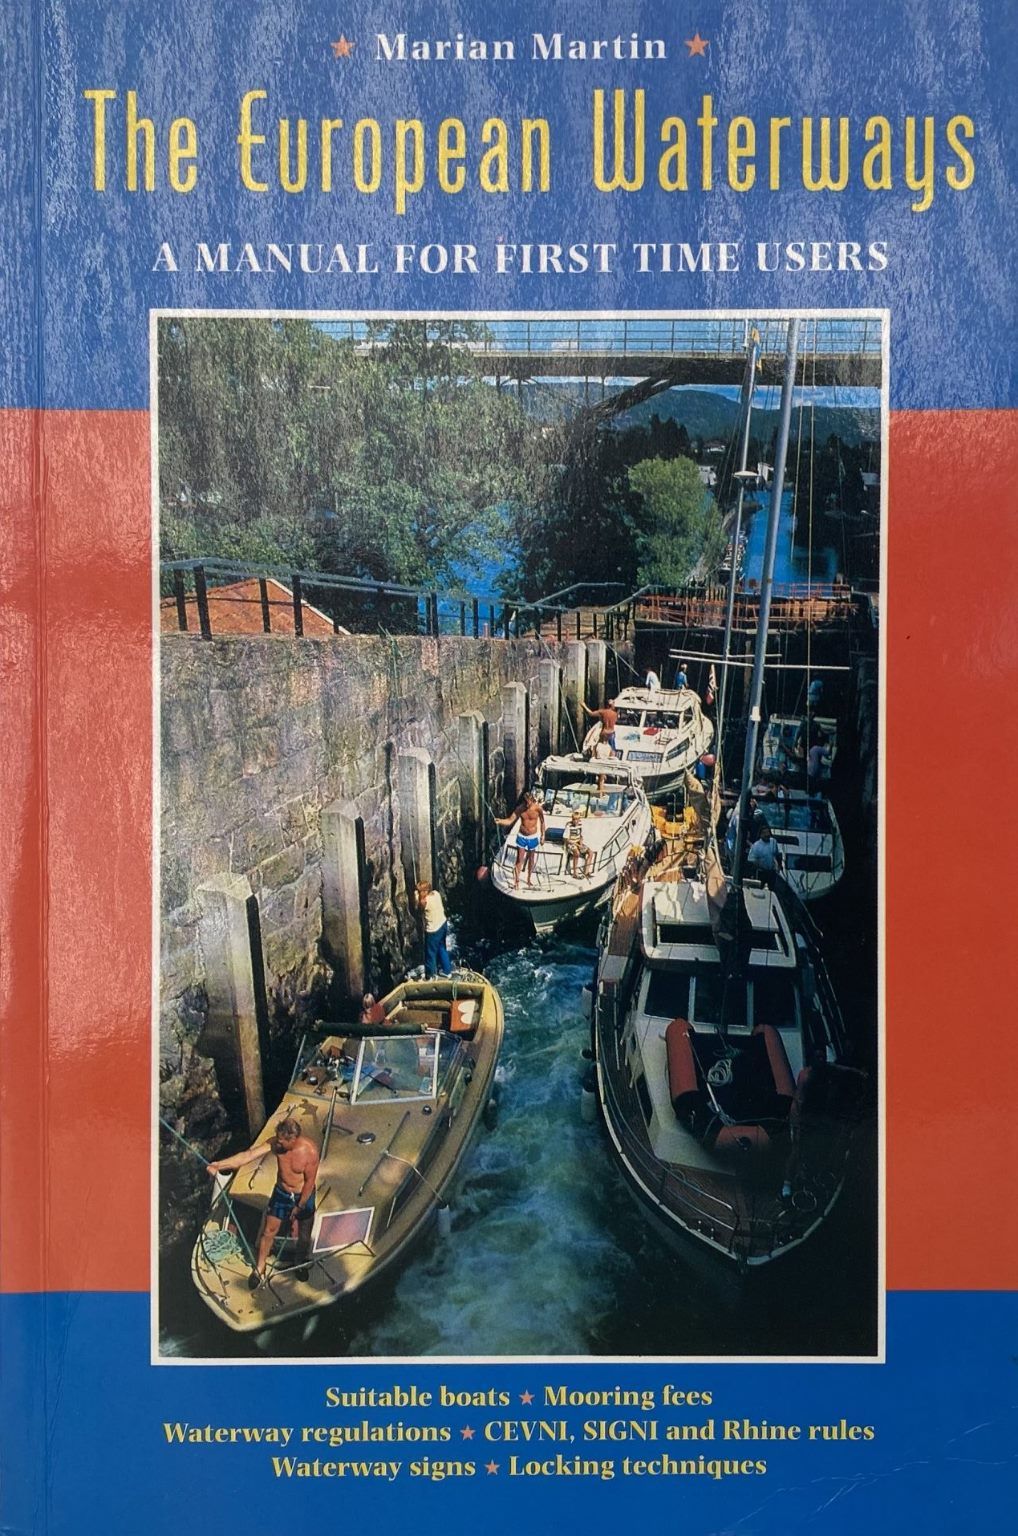 THE EUROPEAN WATERWAYS: A Manual for First Time Users